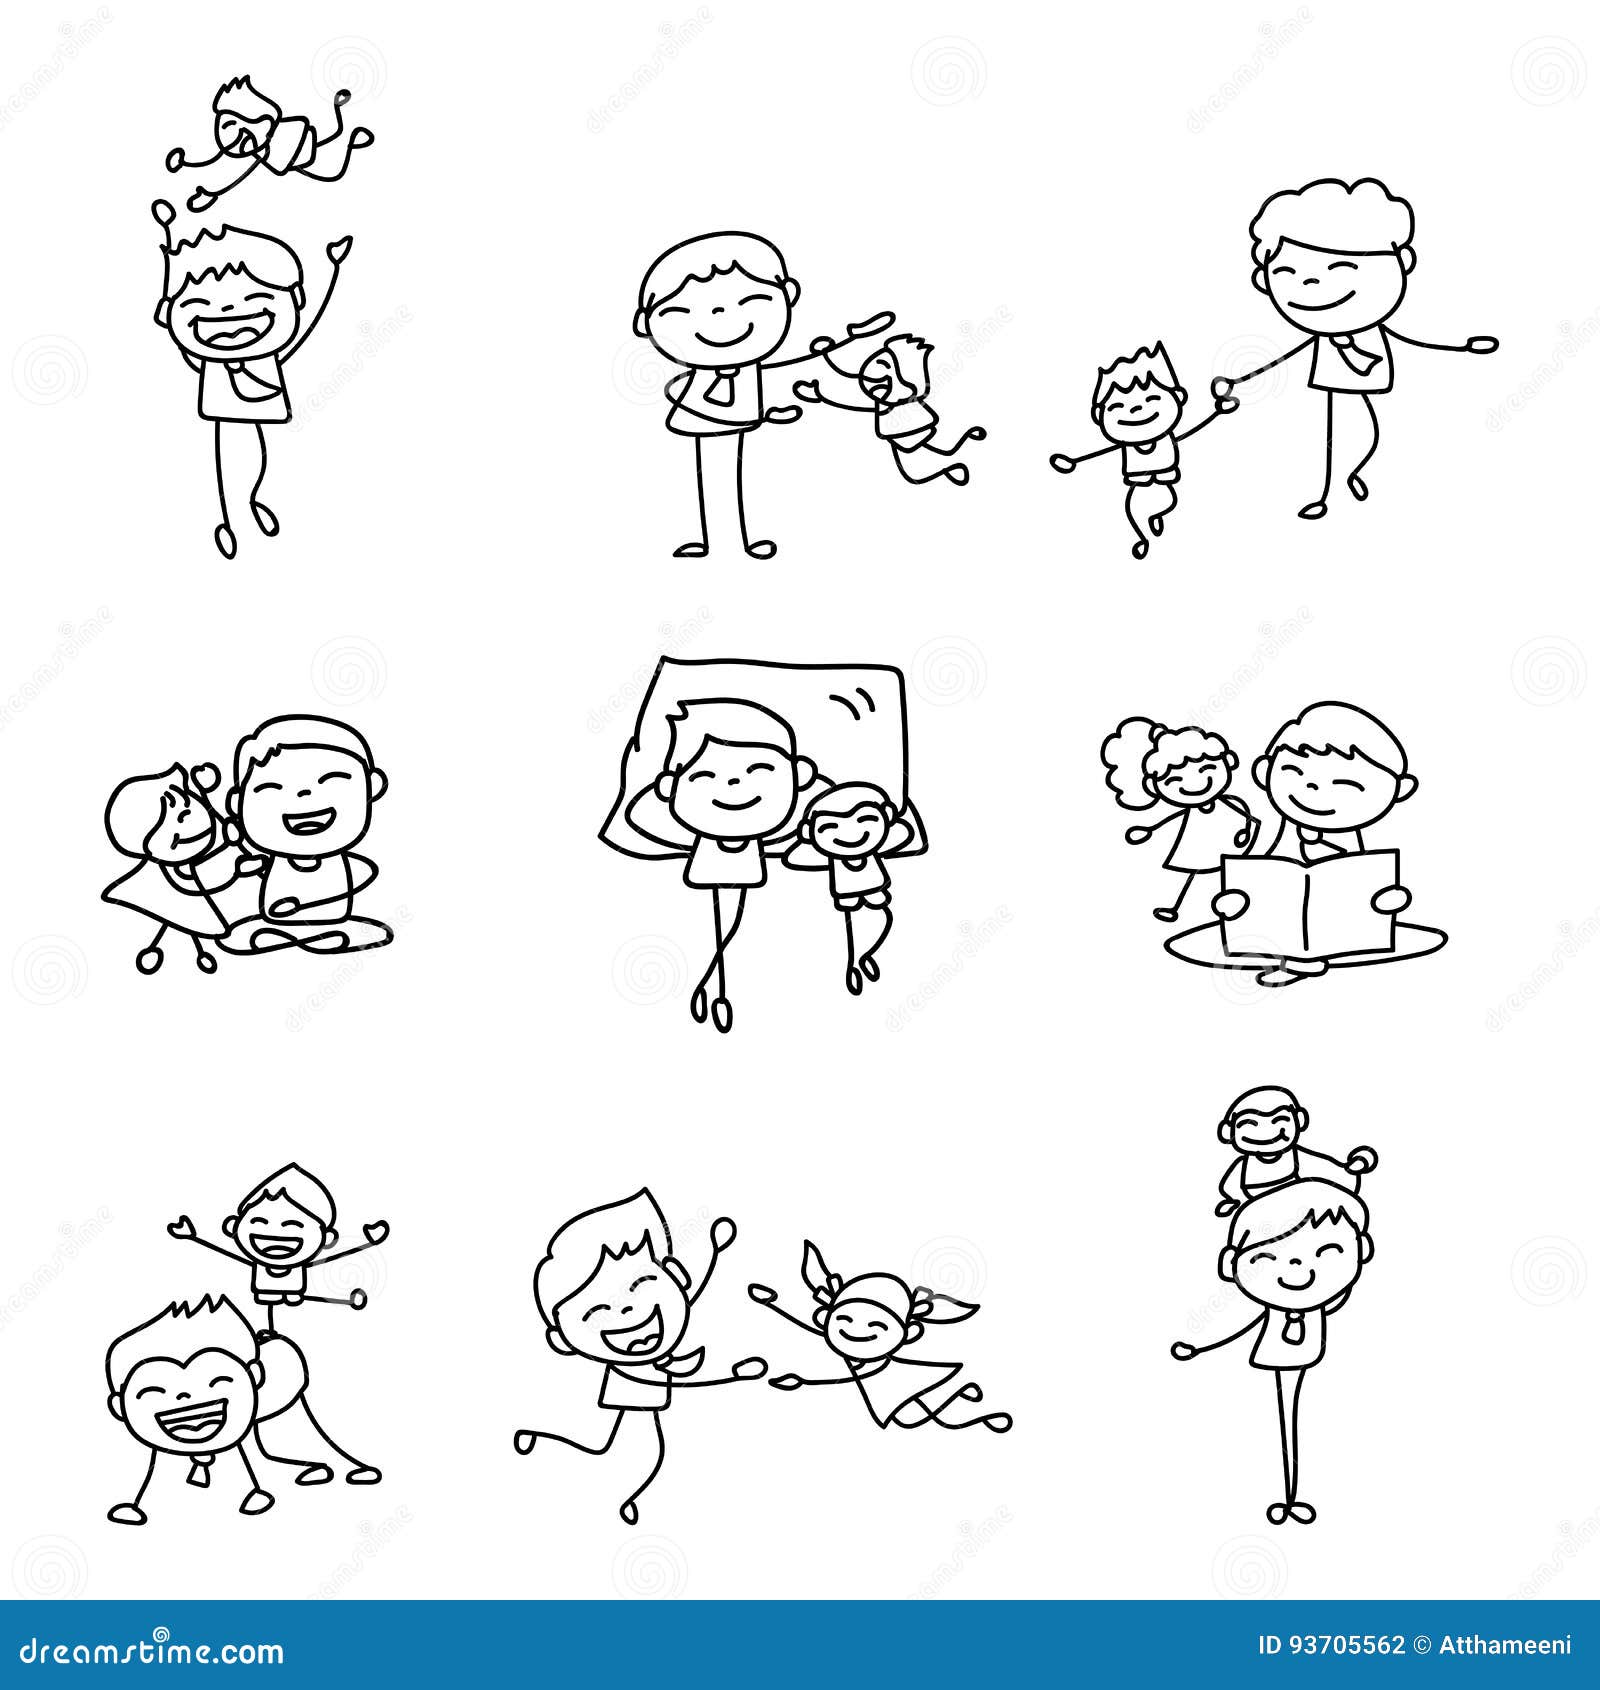 Father and Daughter Sketch Vector Images (over 1,300)